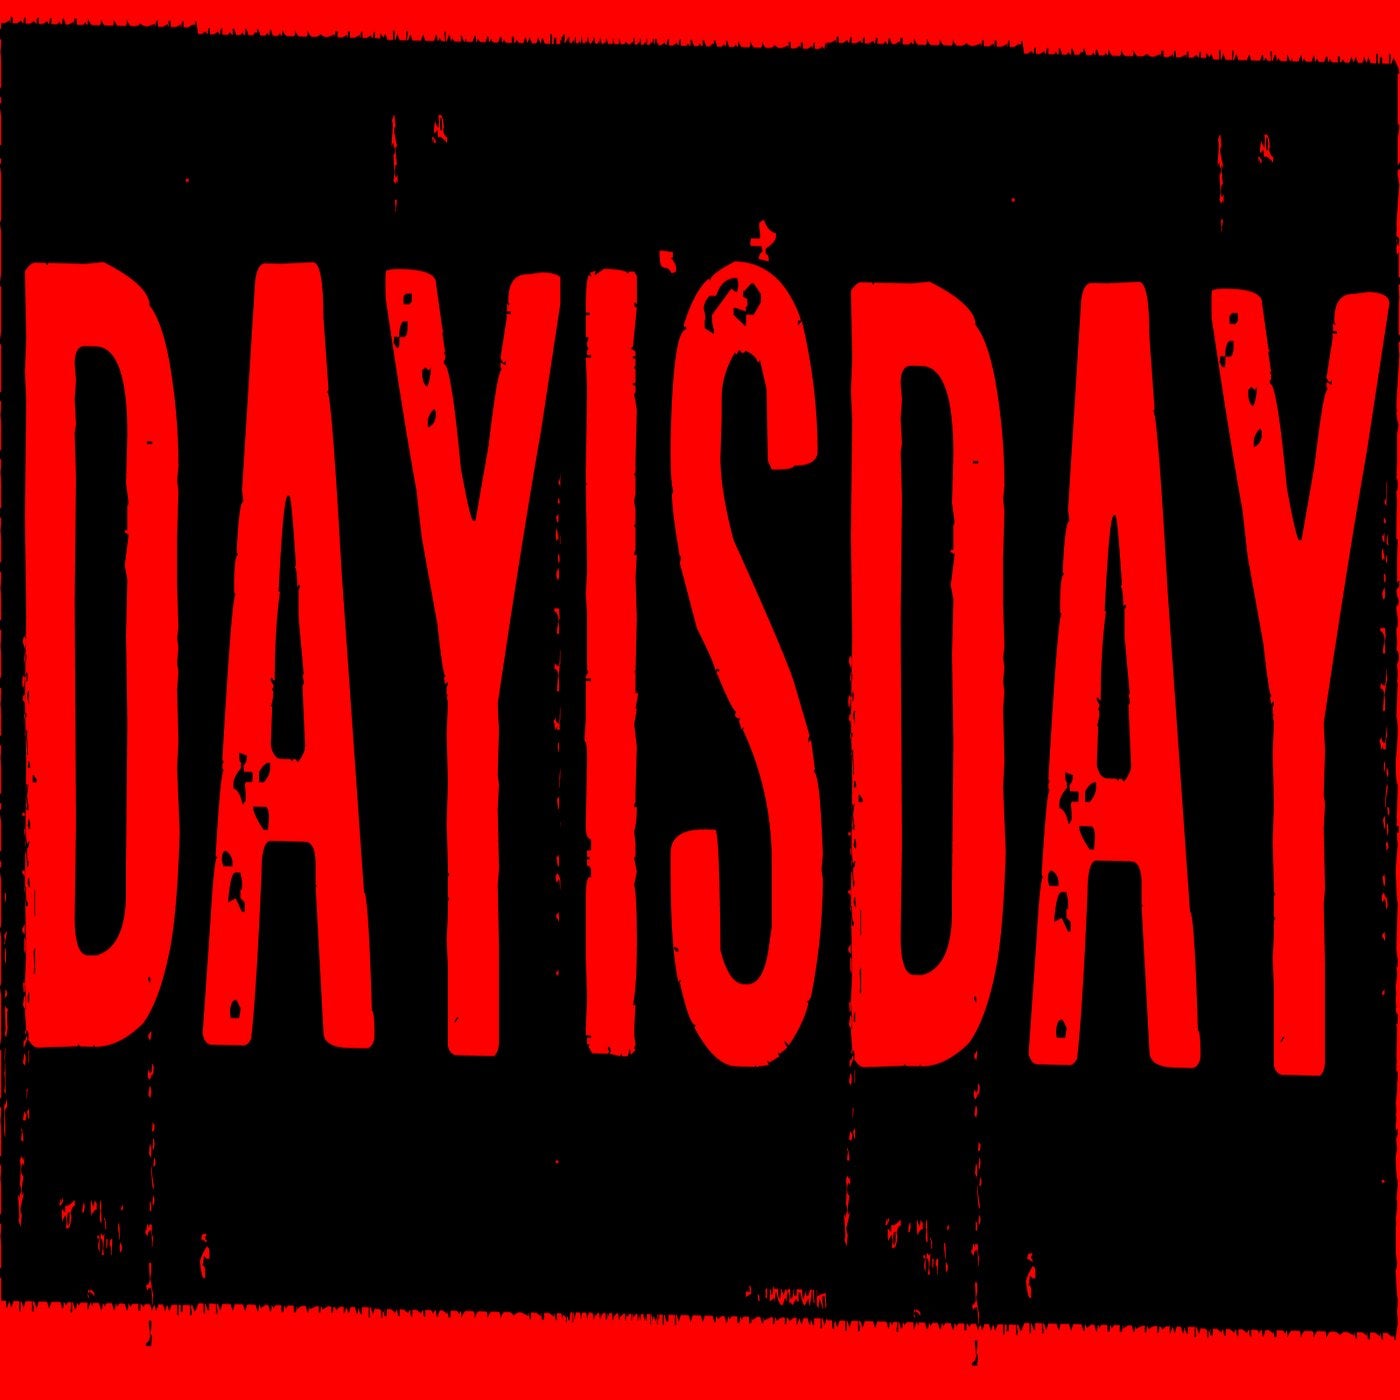 Day Is Day